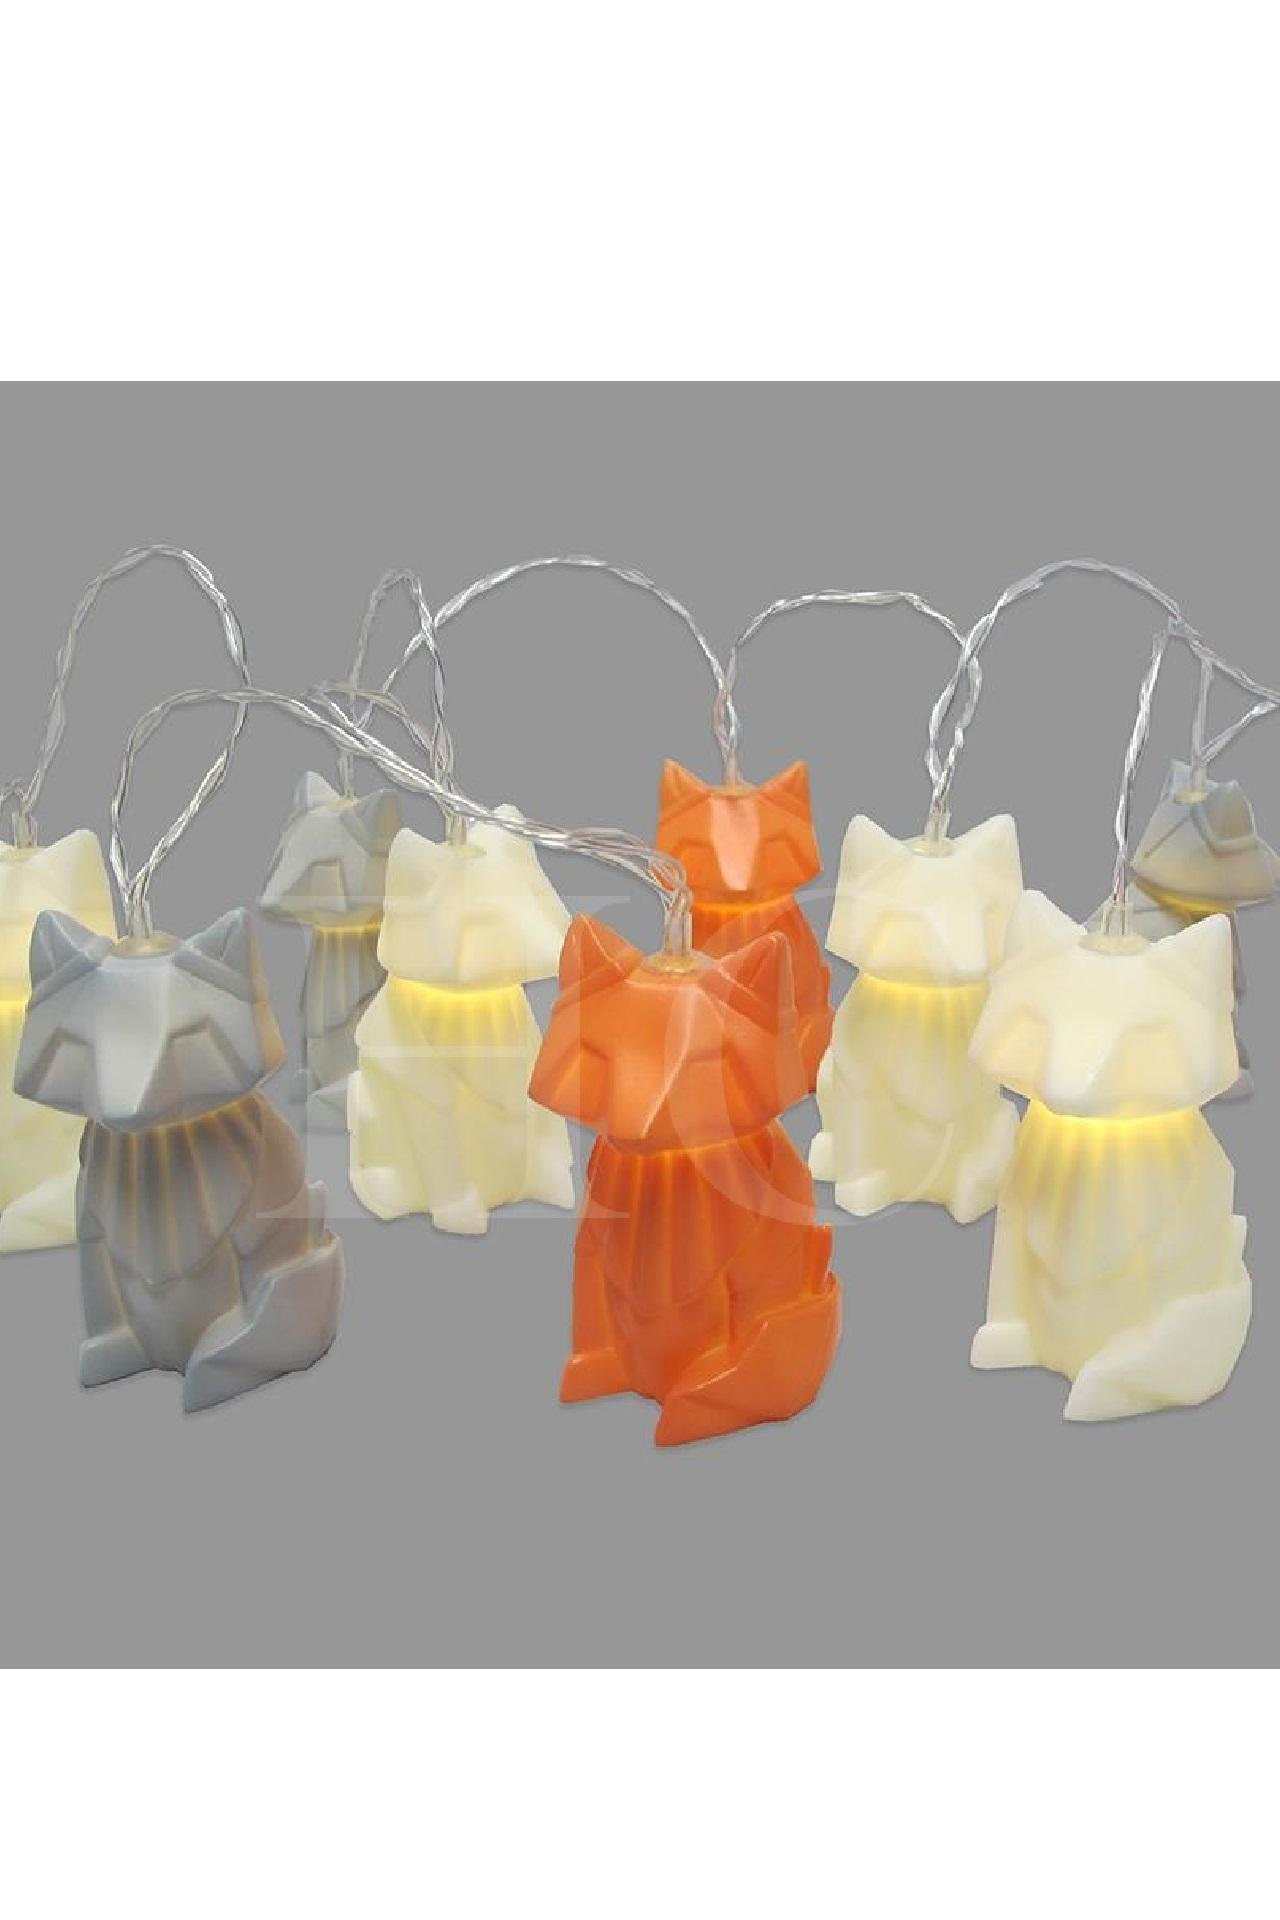 dok Onbepaald pianist Horse Country Carrot - Fox Origami String Lights